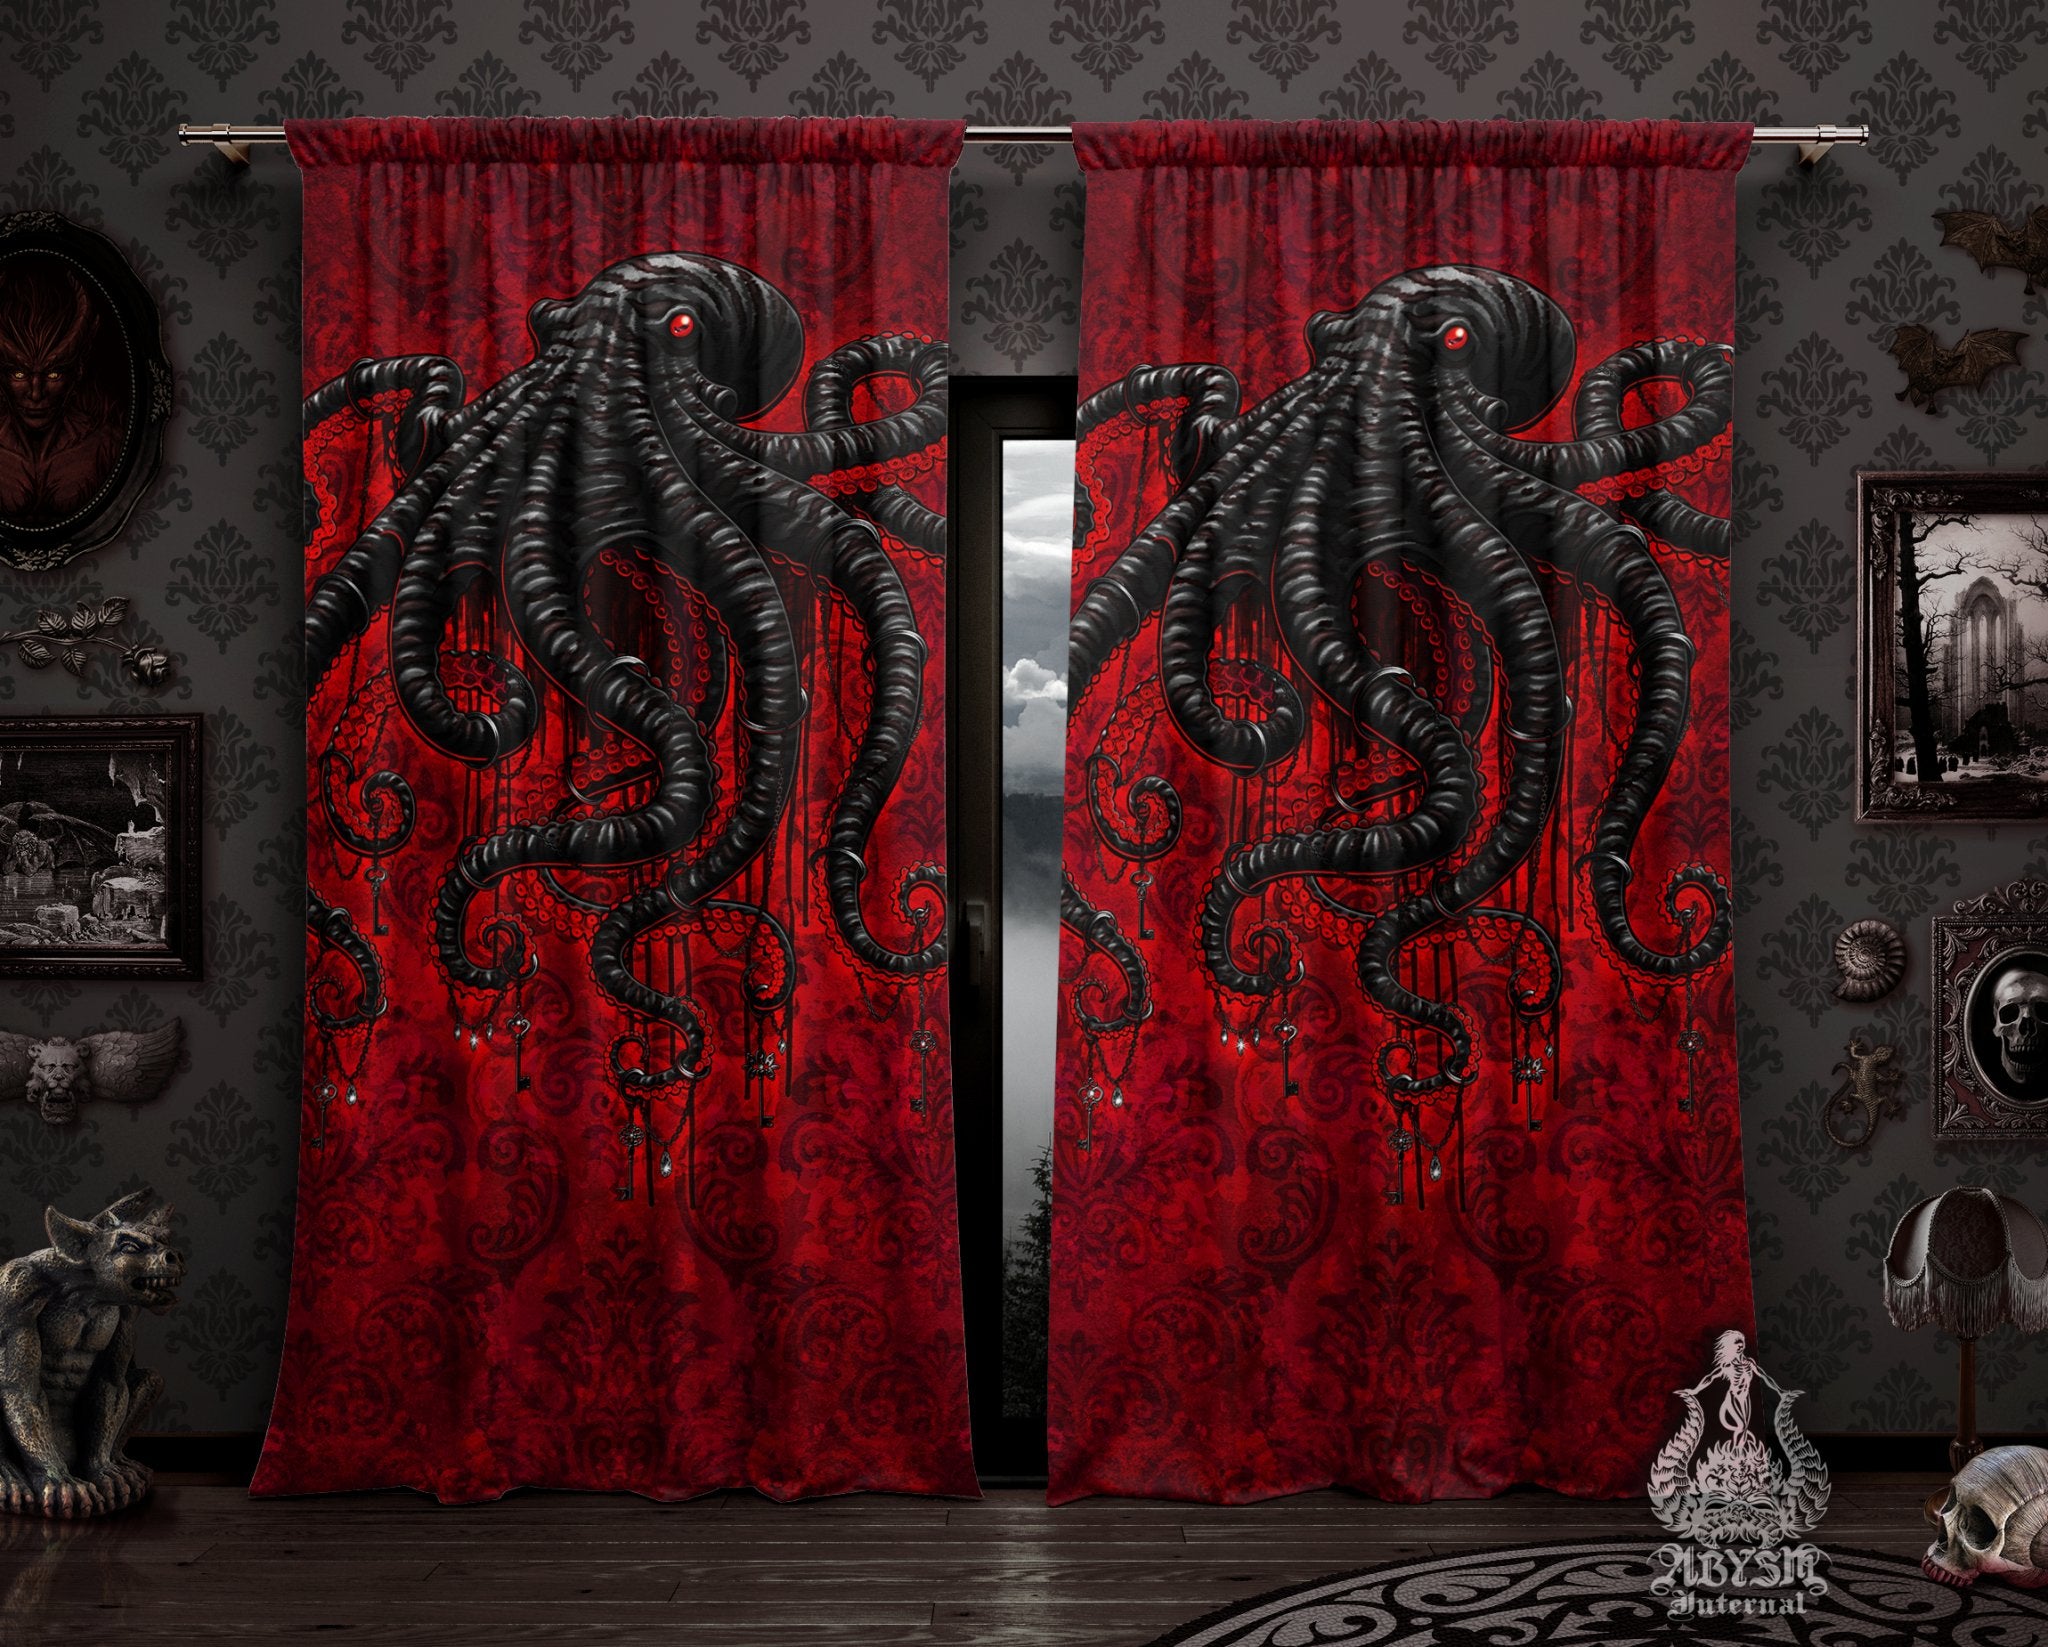 Red Gothic Curtains, 50x84' Printed Window Panels, Octopus Art Print, Goth Home Decor - Bloody Black - Abysm Internal